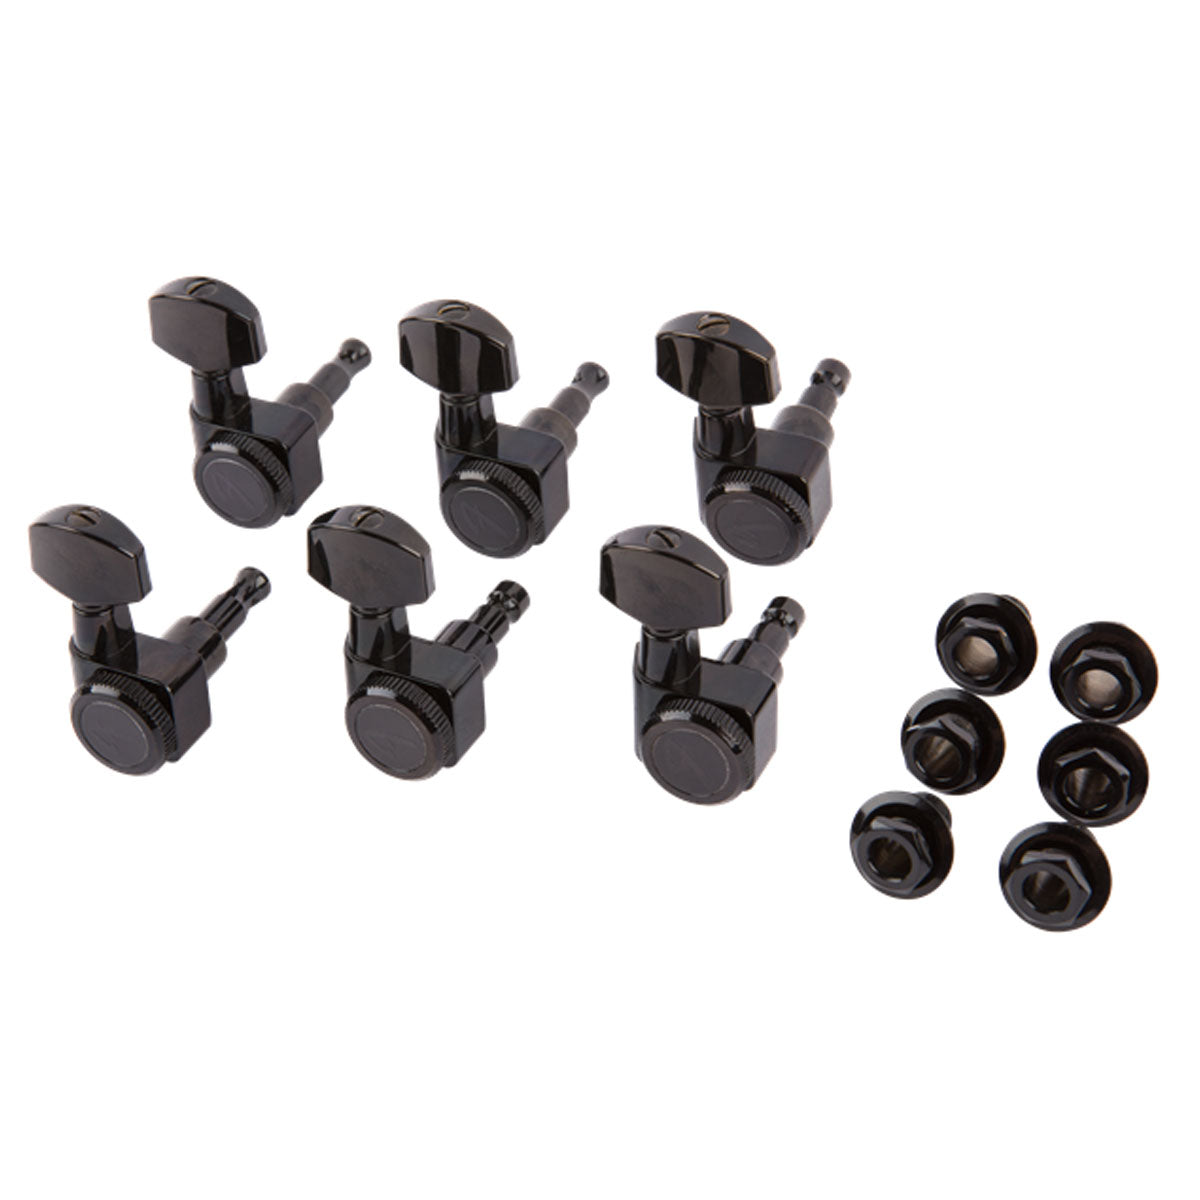 Fender Locking Tuners Black - Stratocaster/Telecaster Tuning Machines (6 Pack) - 0990818400